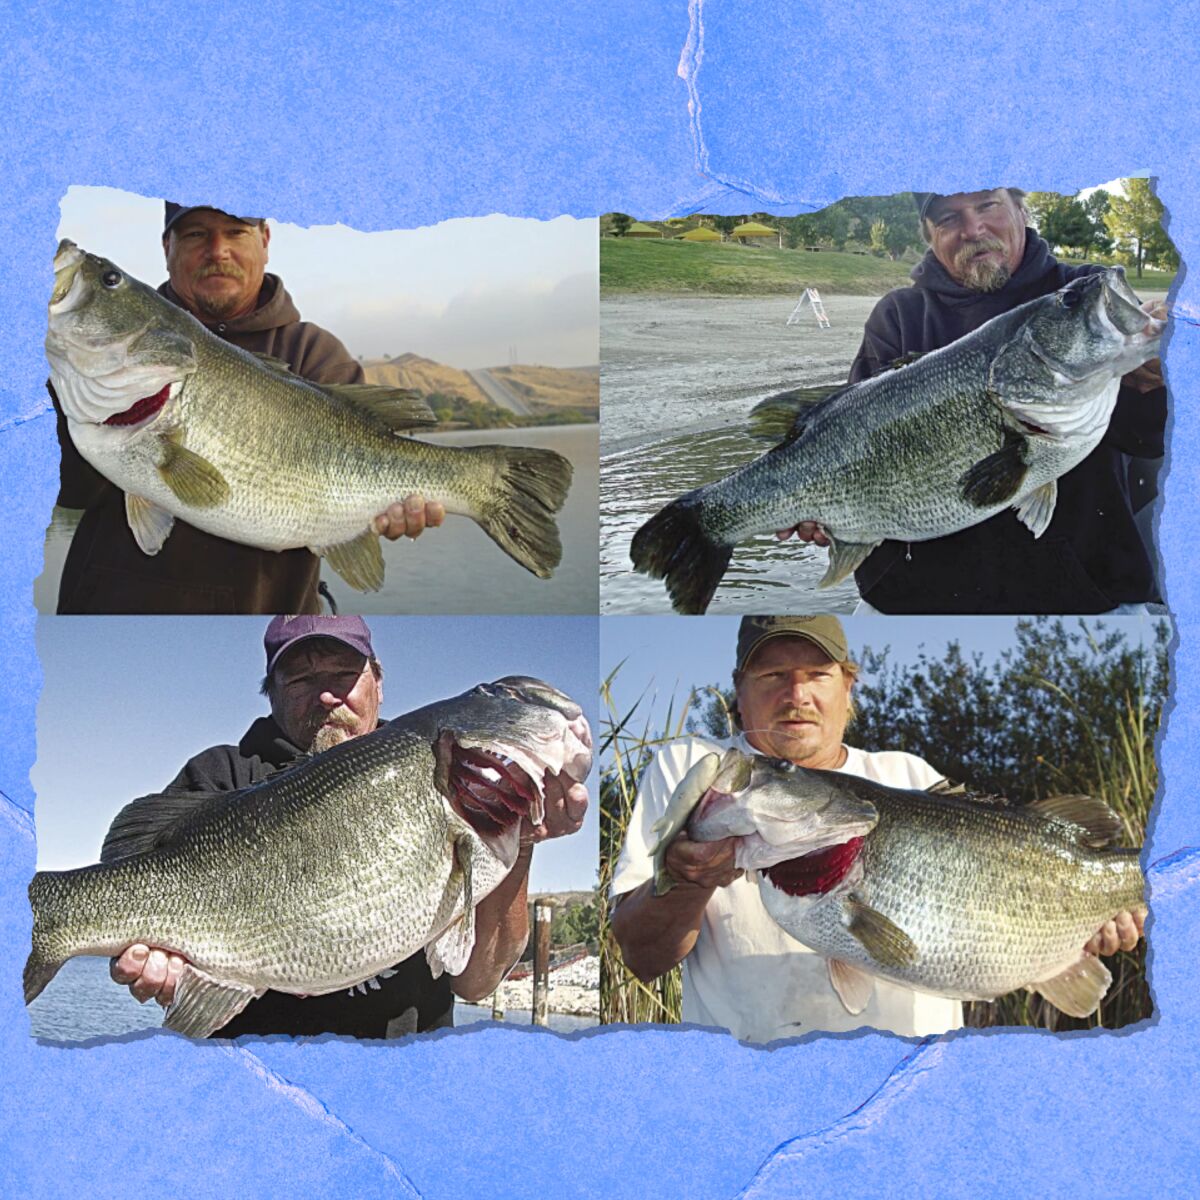 In four photos, a man holds large fish.